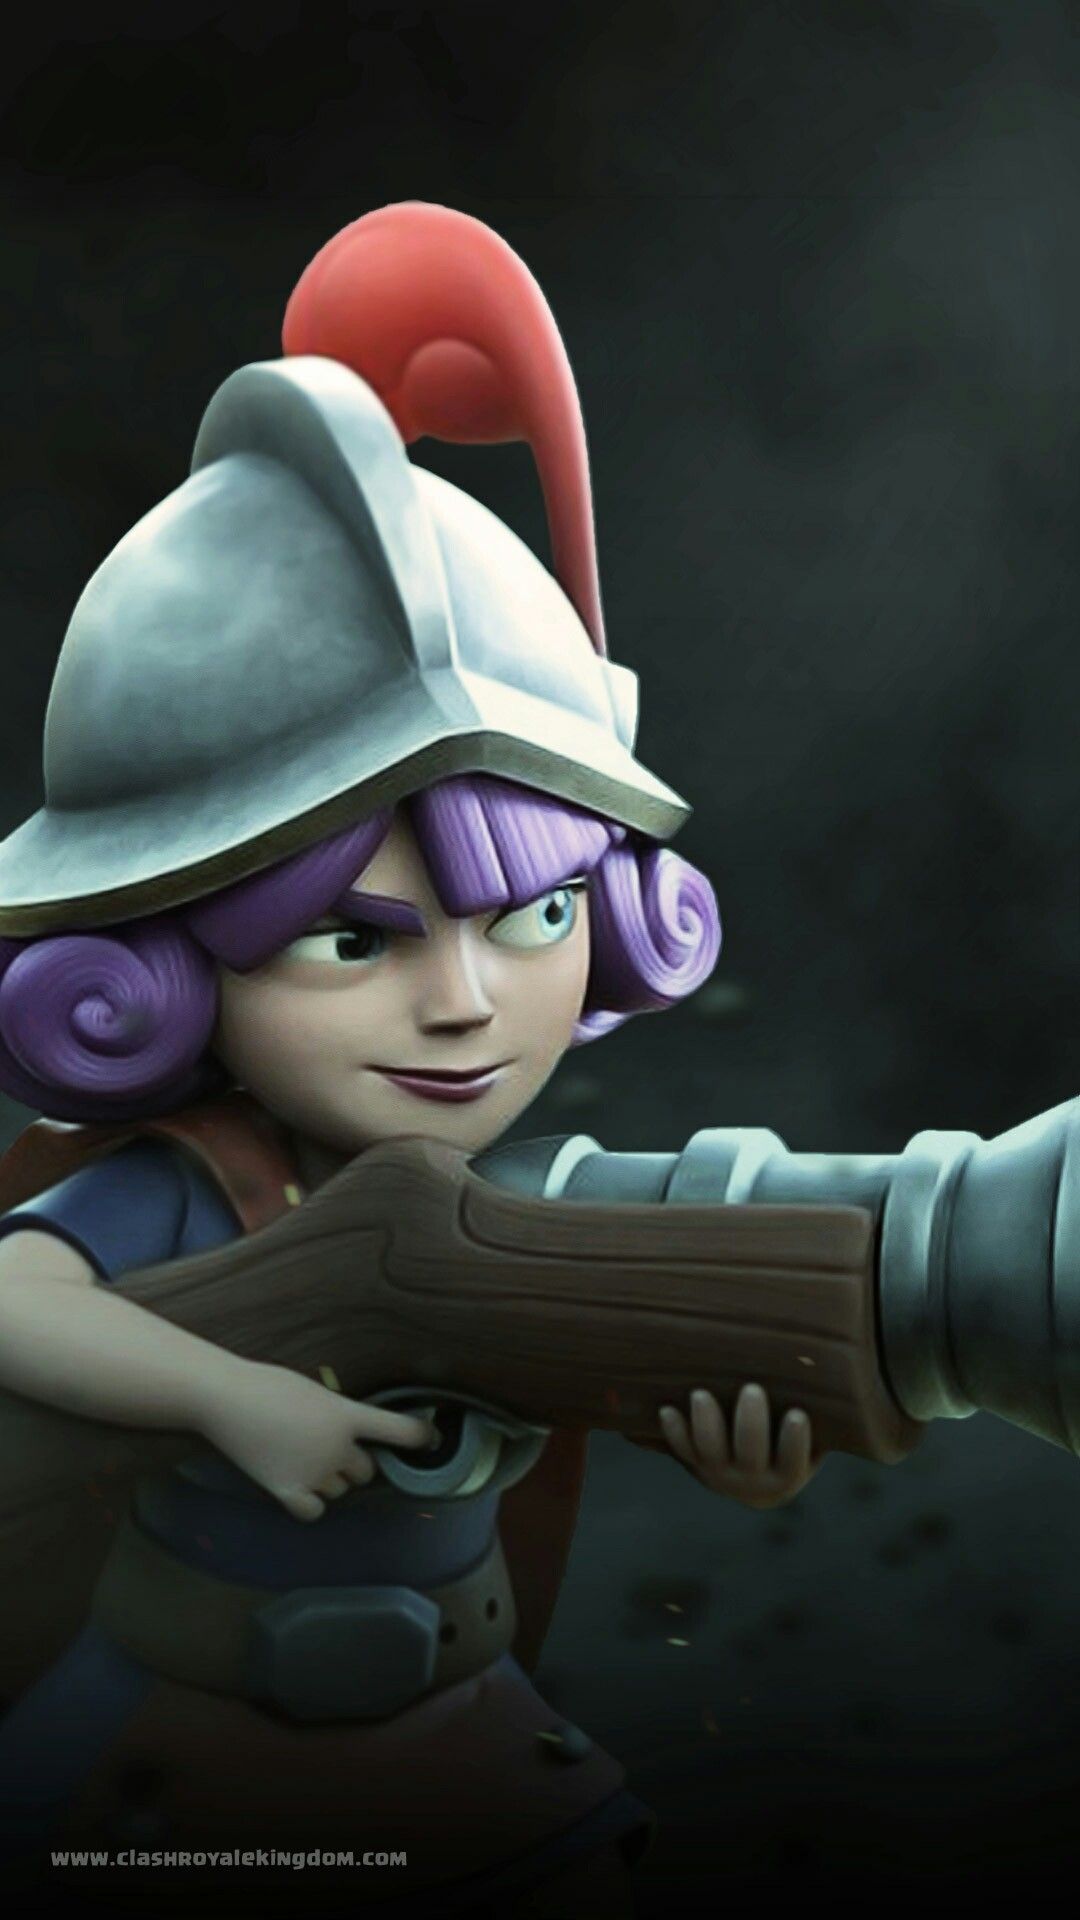 A Shot from the Musketeer. Clash royale wallpaper, Clash royale, Character design animation